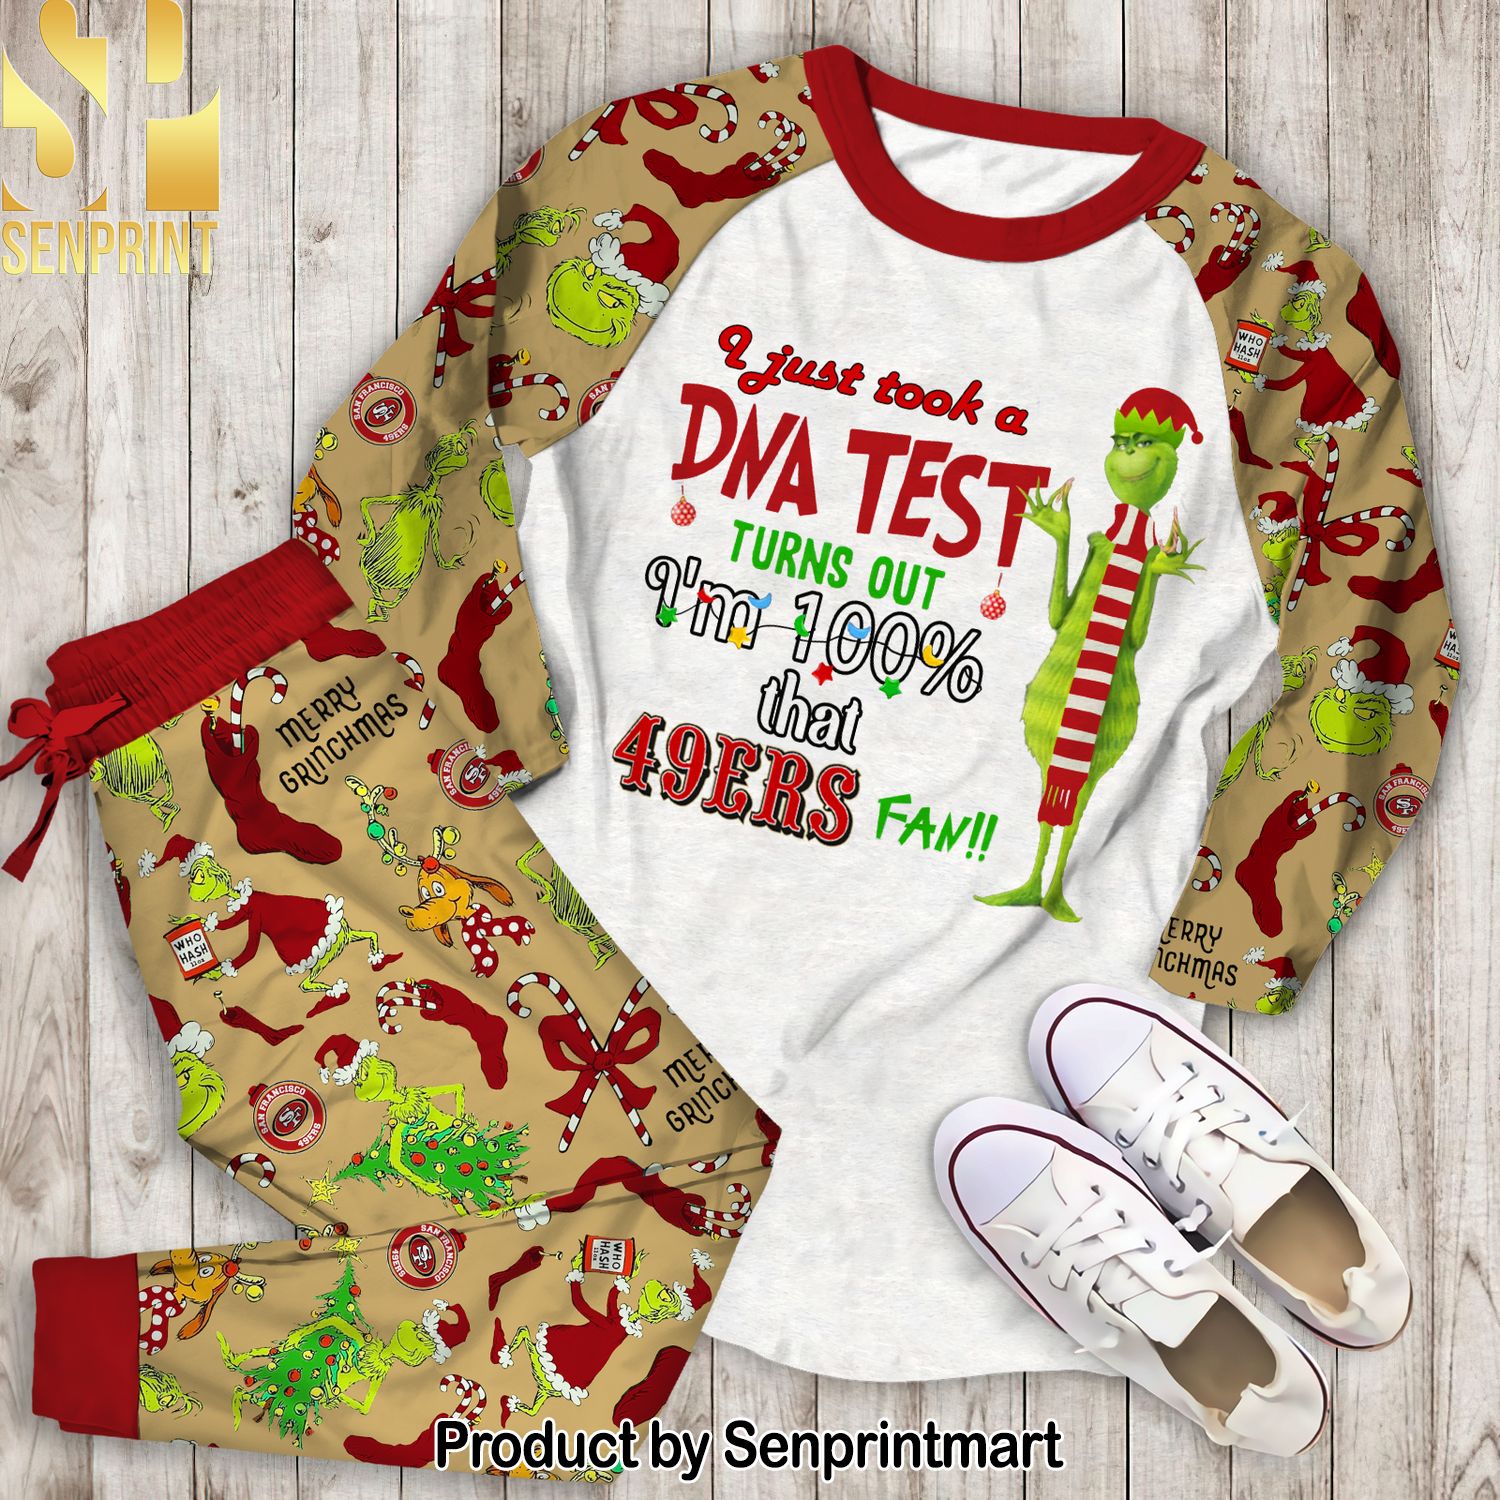 NFL Grinch I Just Took A DNA Test Turn Out I am 100% that San Francisco 49ers Fan Unisex Full Printing Pajamas Set